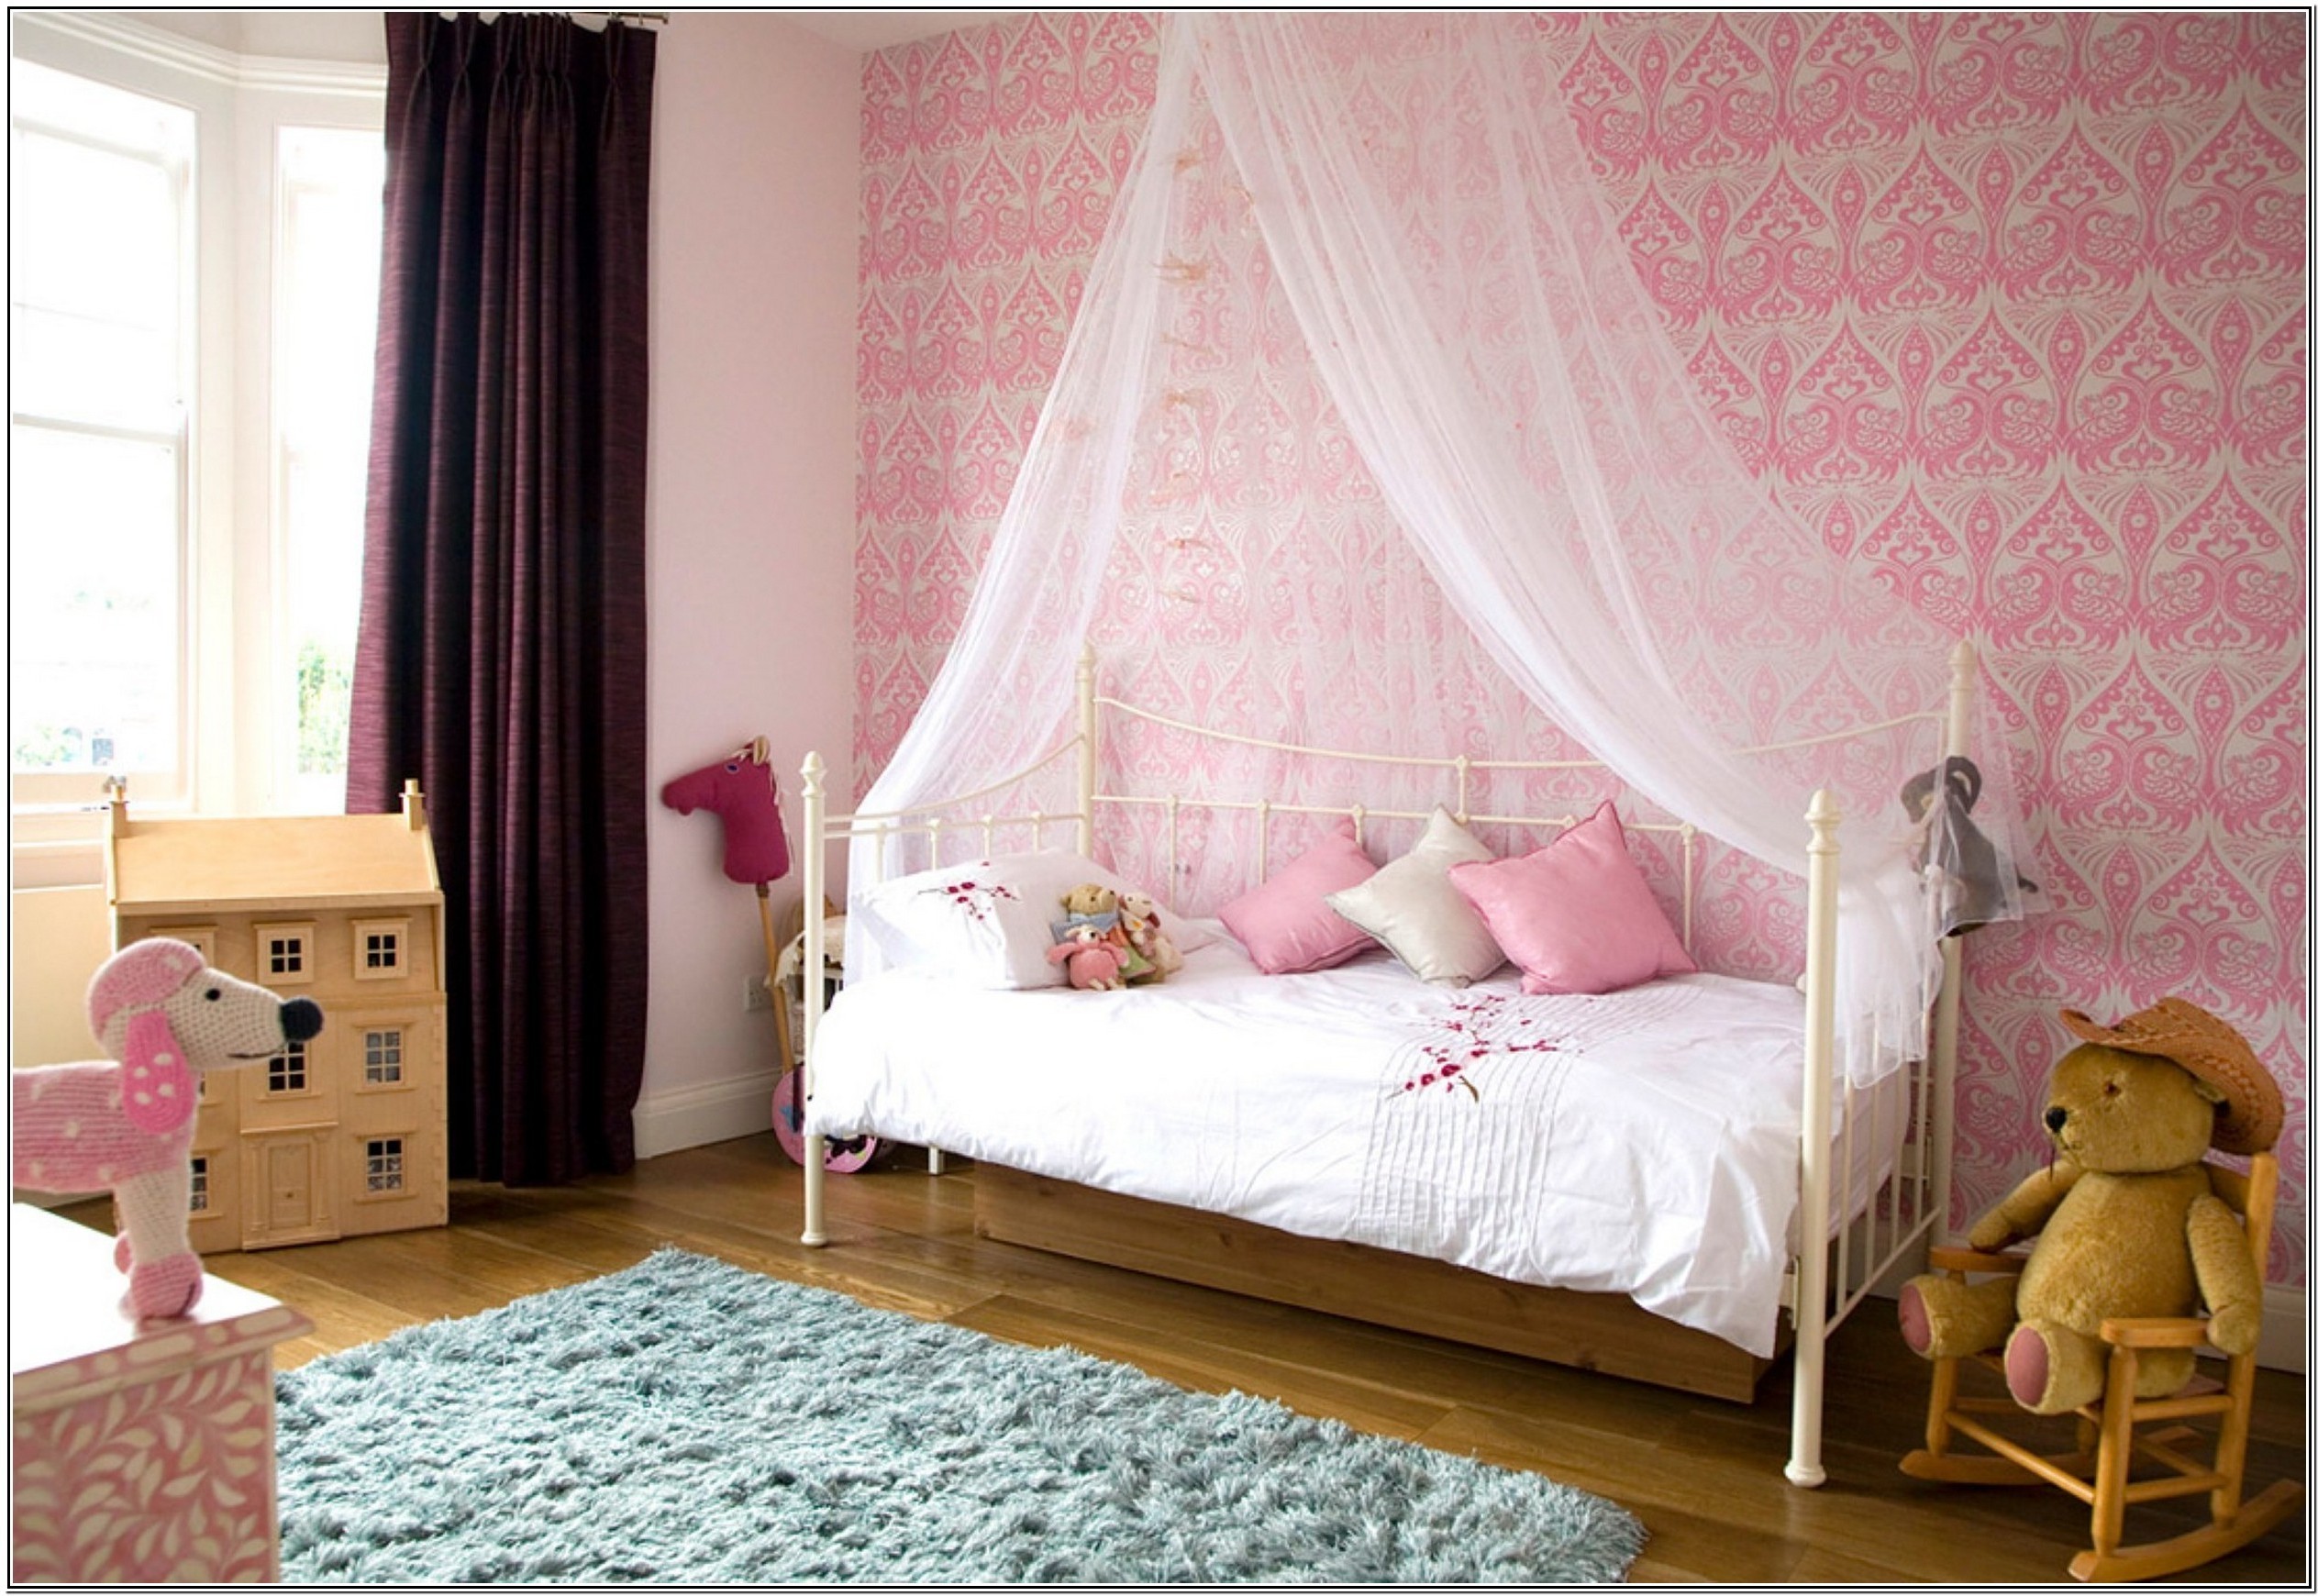 2527x1740 ... Bedroom Little Girls Room Decoration Ideas Wrought Iron Bed Frames  White Curtains Canopy Brown Wooden Laminated